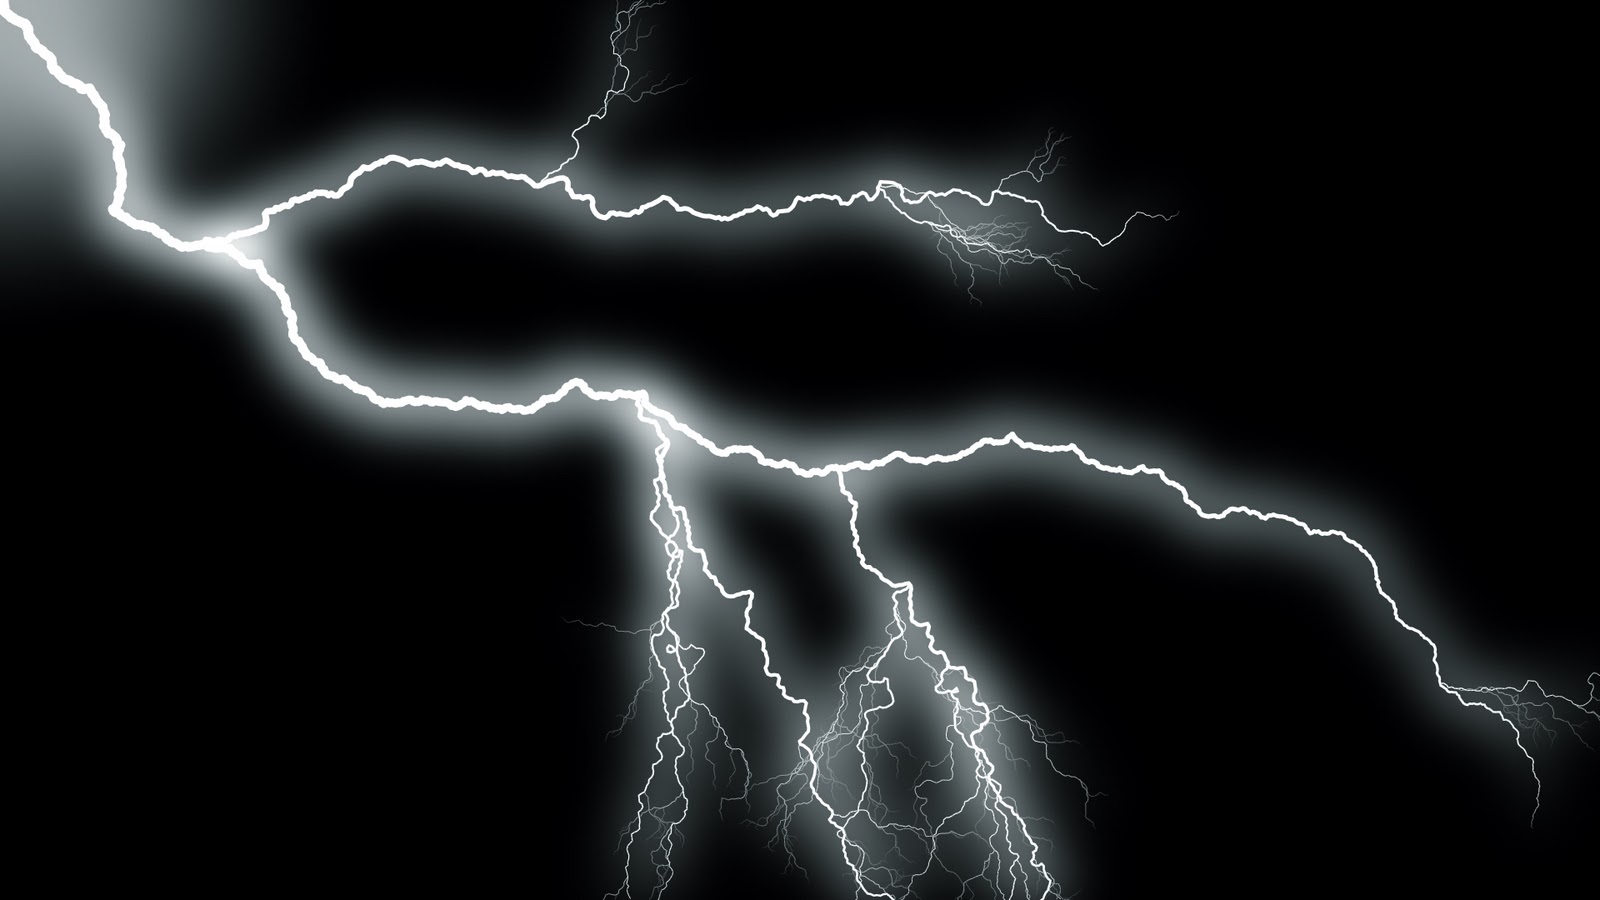 Mobile wallpaper Nature Lightning Earth Storm Cloud Black  White  1244157 download the picture for free